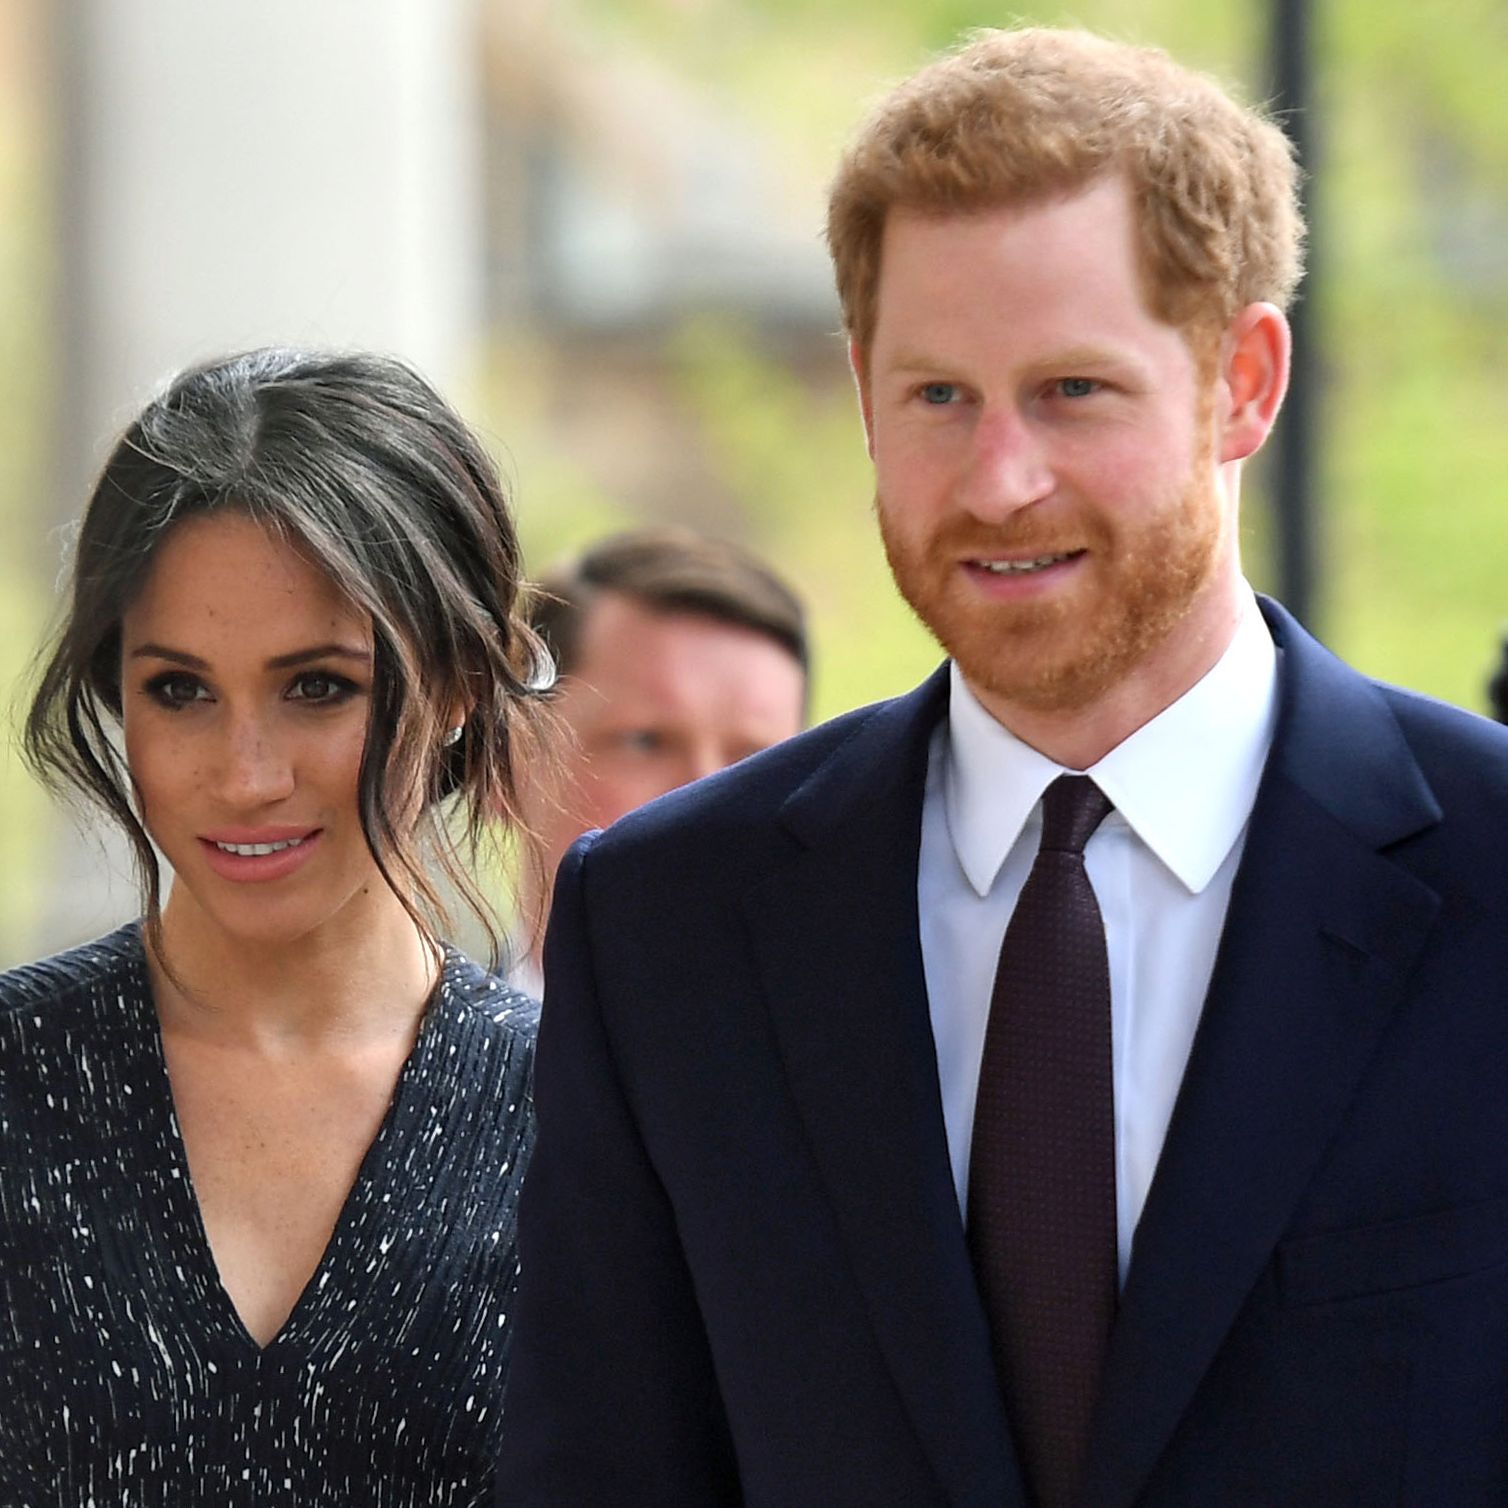 Now Sources Are Claiming the Sussexes' Netflix Docuseries Is Dropping in December After All